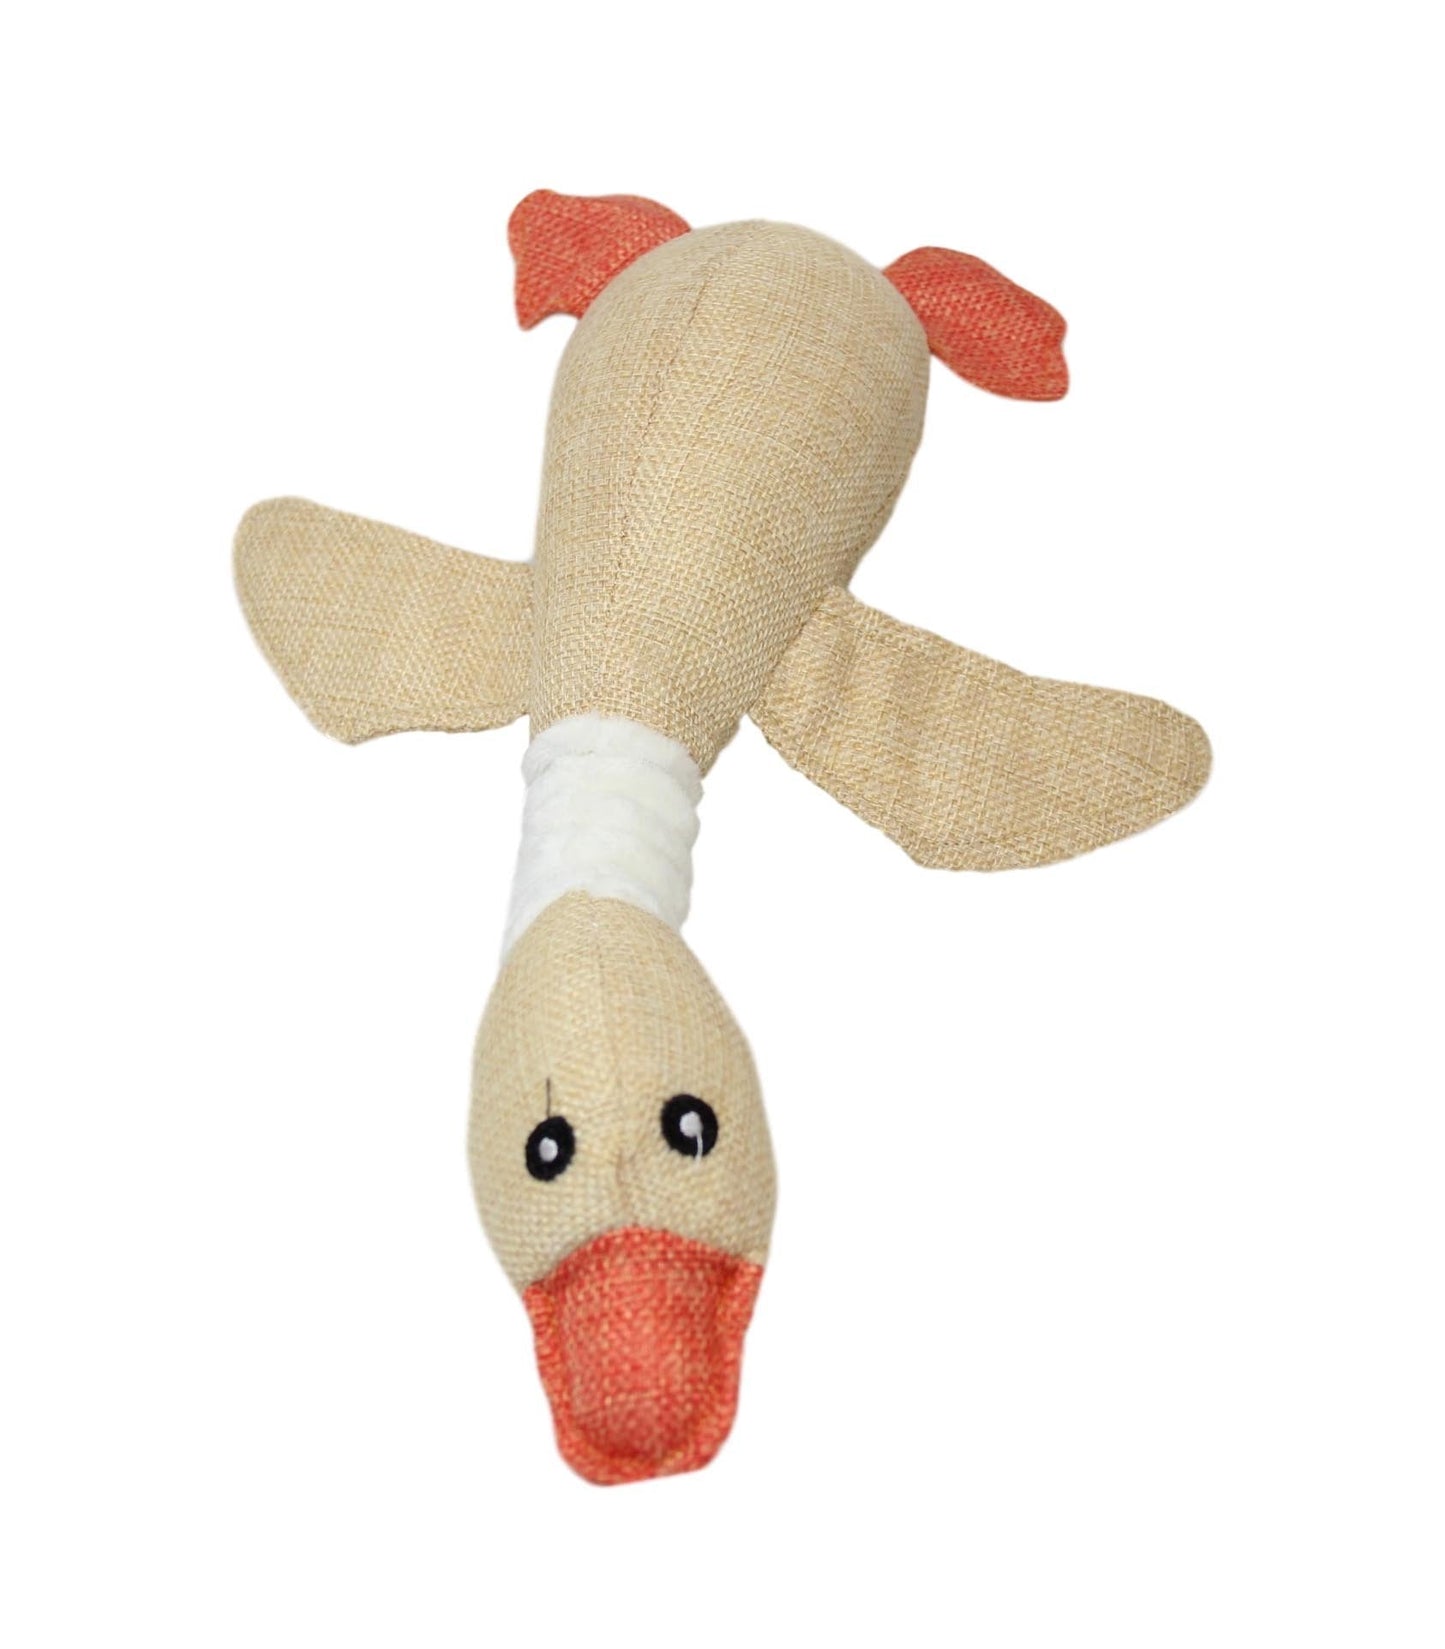 Pets Cats Dogs Soft Toy Duck / Goose Playing Fetch Teething Pets Toy 30 x 7cm Assorted Colours 5885 (Parcel Rate)